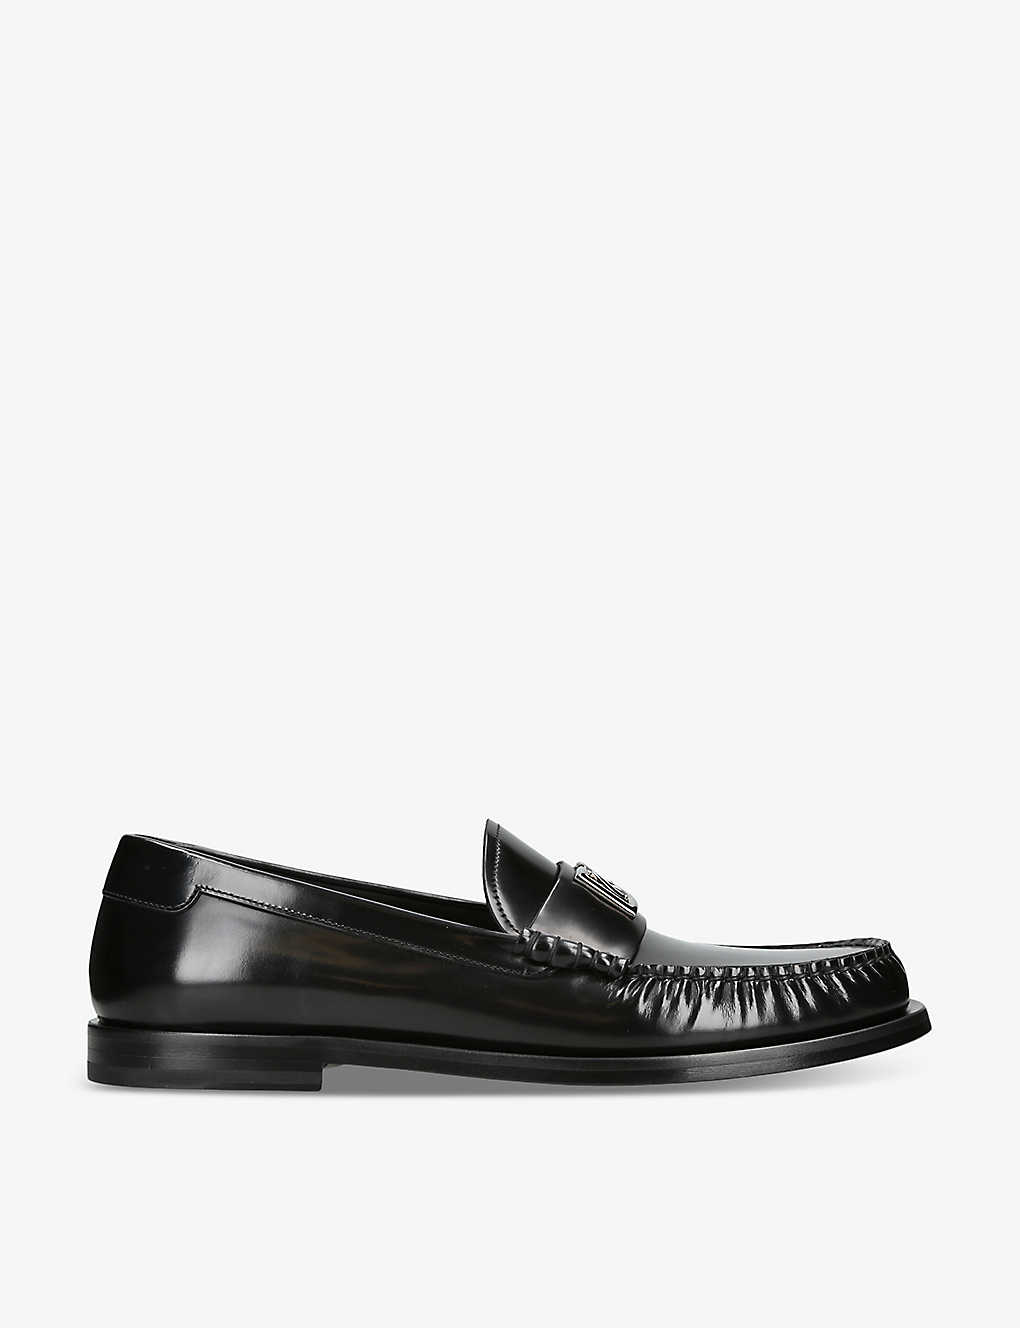 Shop Dolce & Gabbana Men's Black Classic Round-toe Leather Loafers